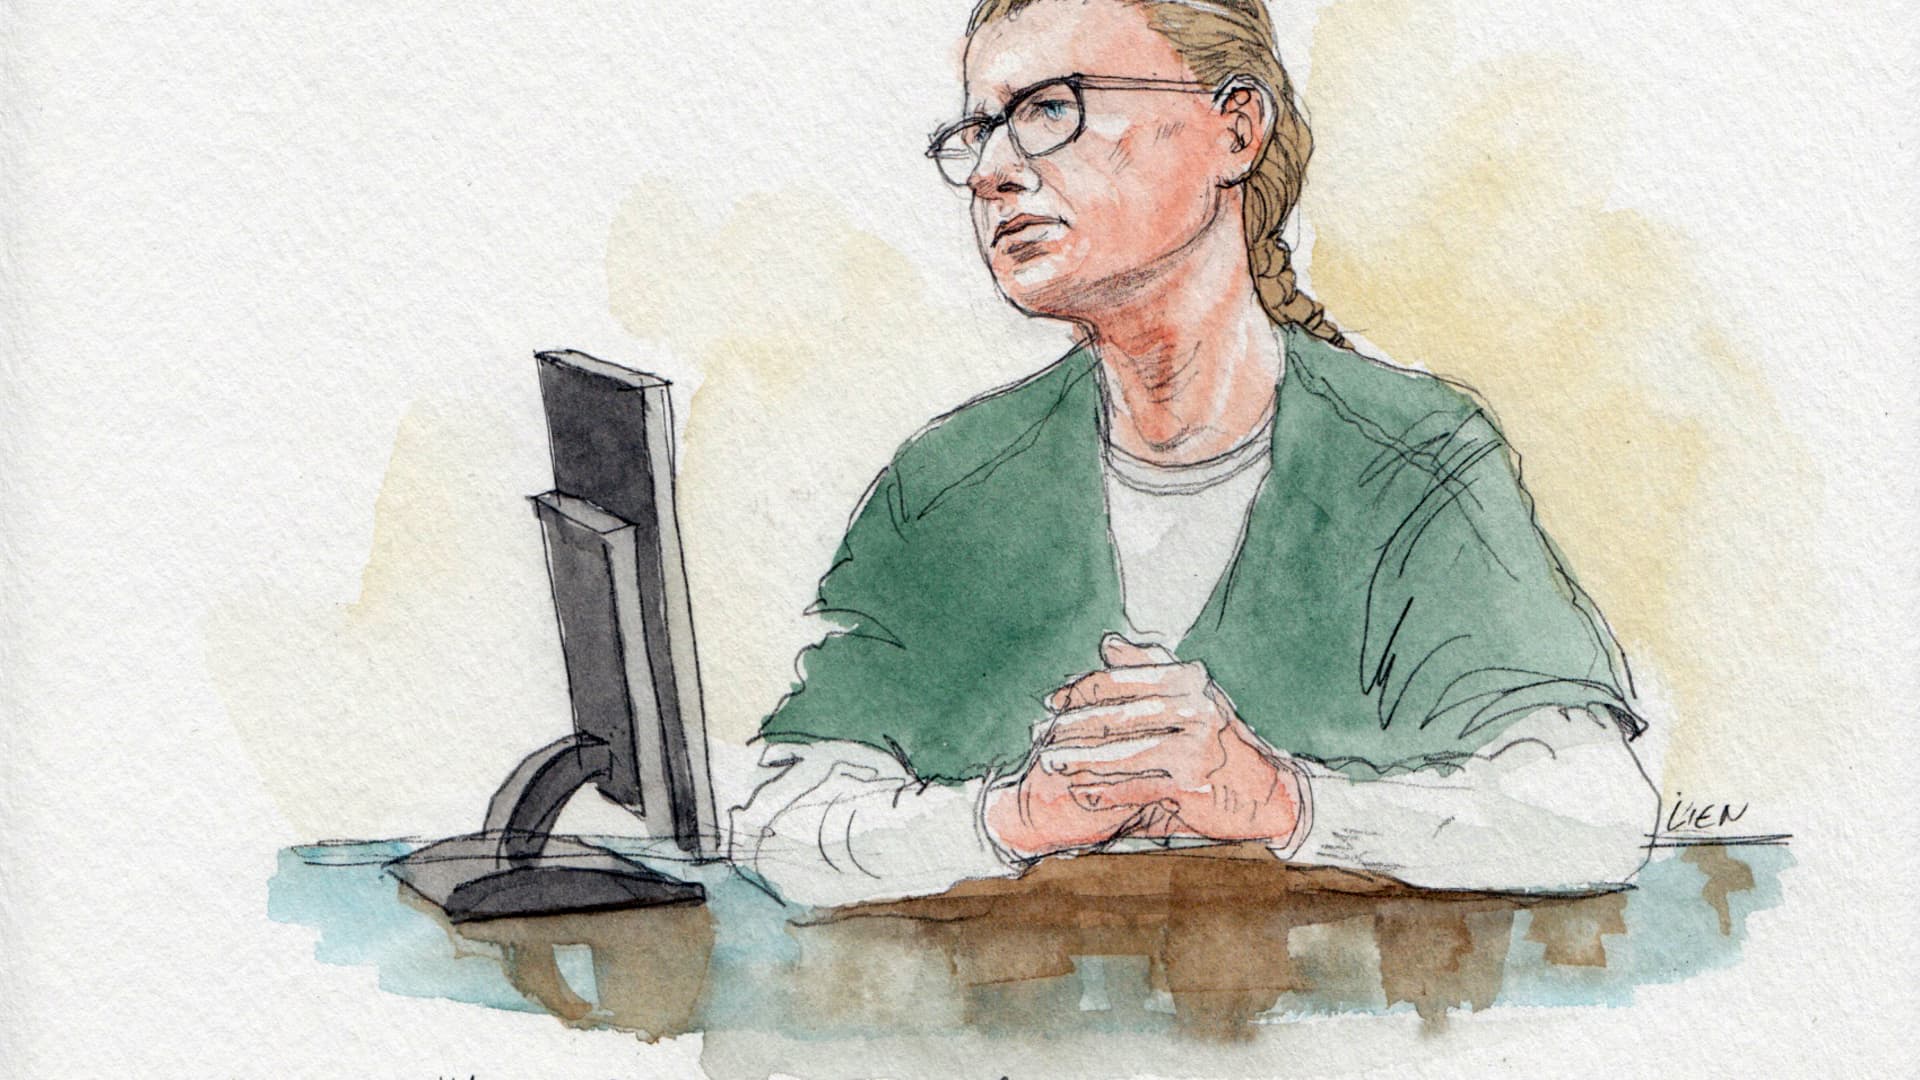 Sketches from the hearing at US District Court in DC for Maria Butina, September 10, 2018.